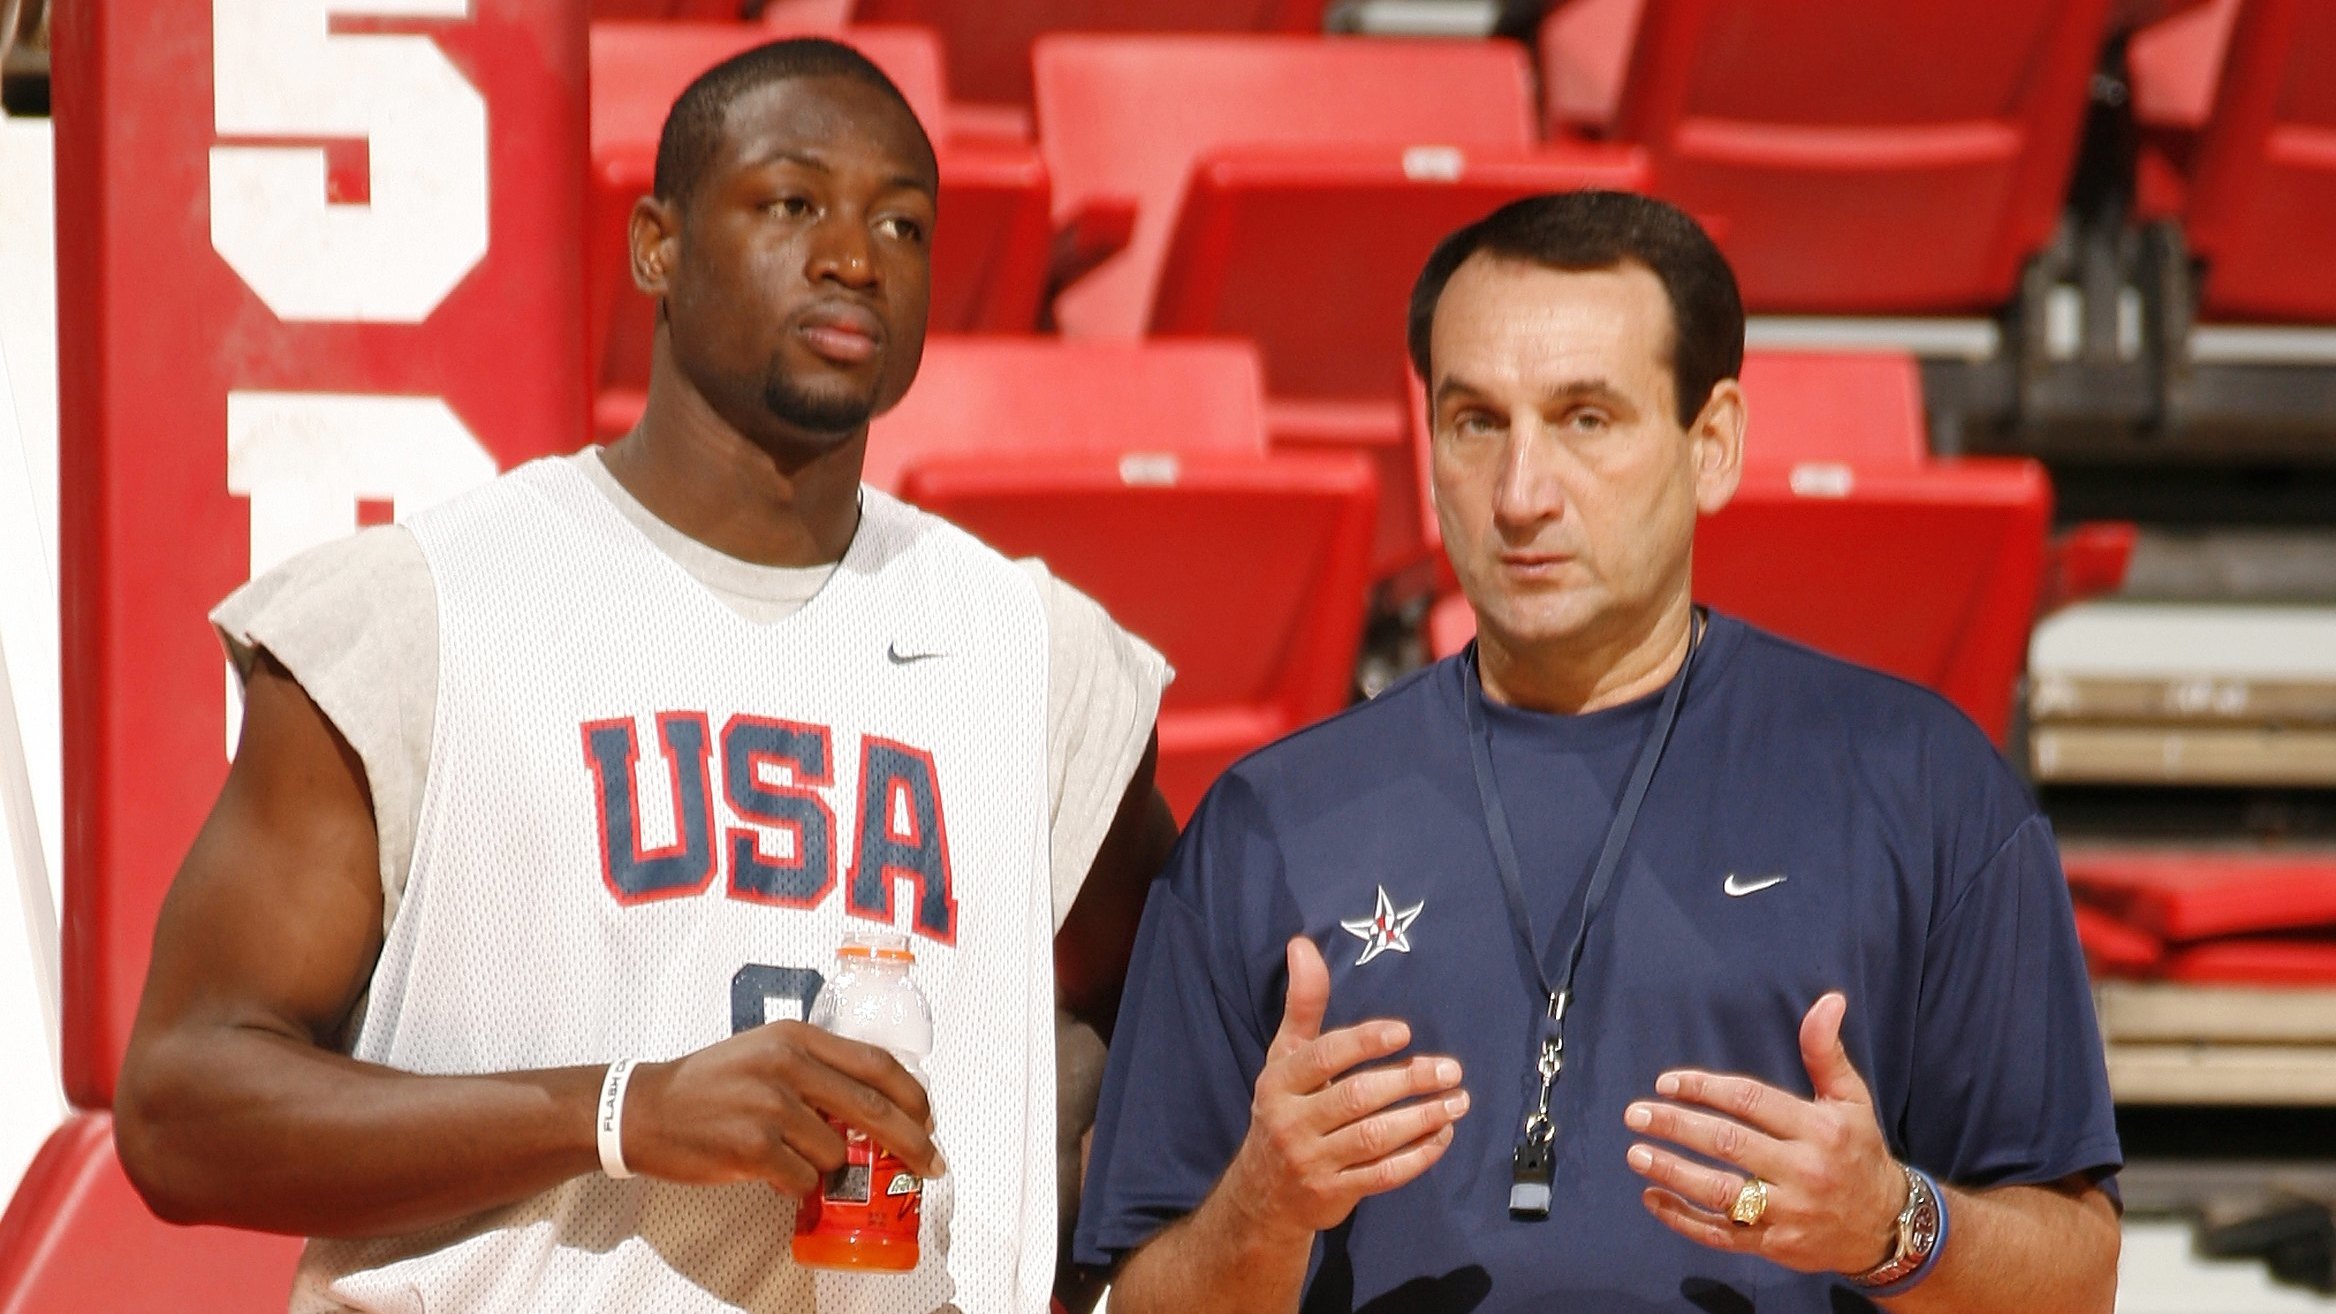 Kobe Bryant Claimed The 2012 USA Team Could Have Beaten The 1992 Dream Team, Fadeaway World